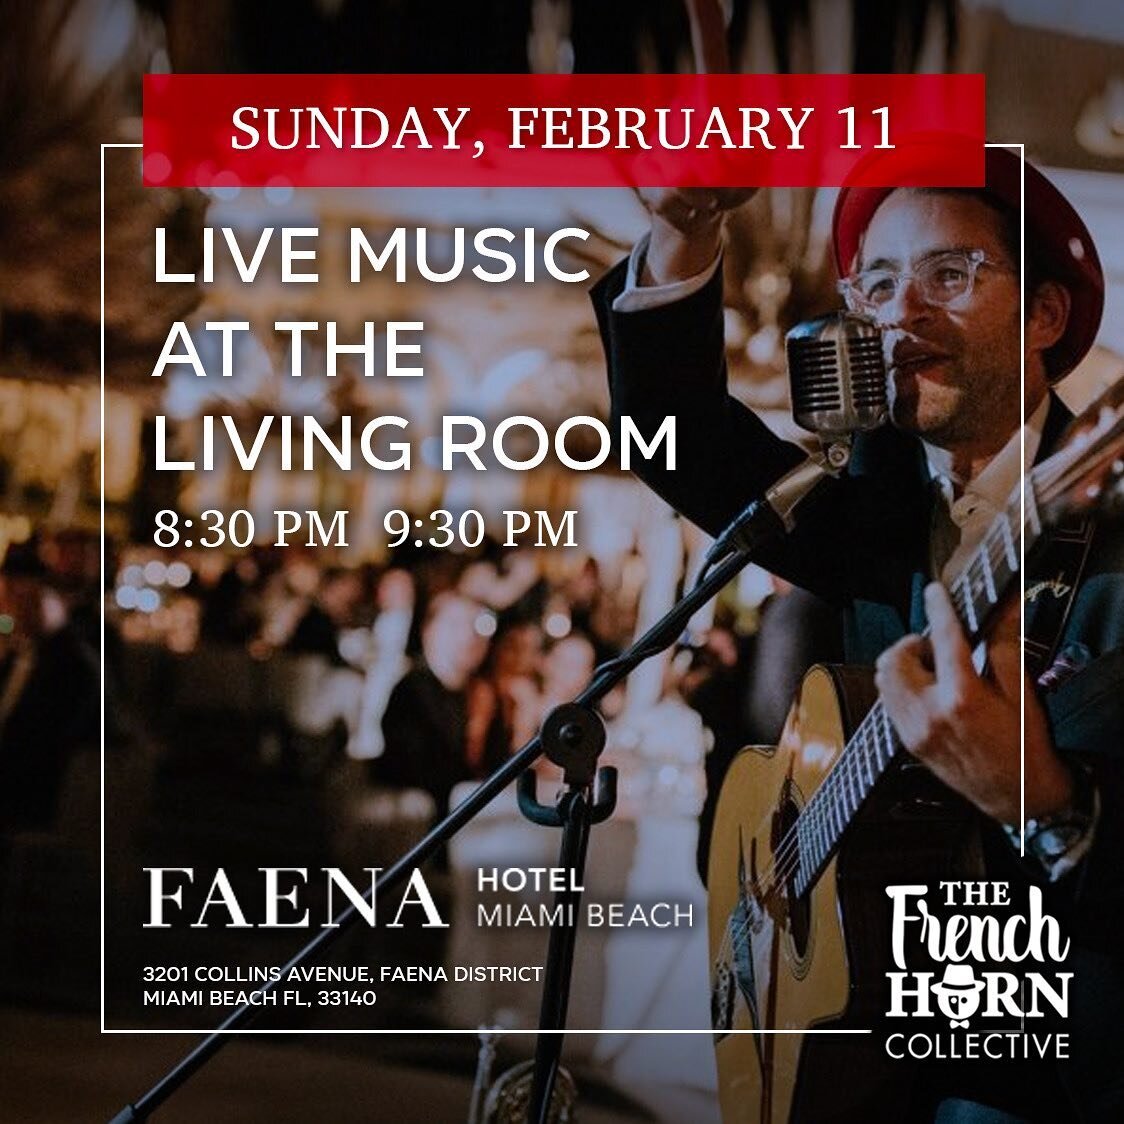 This Sunday only @faena, special french and American jazz will be playing 
#faenahotel #livingroomatfaena 
#livemusic #thefrenchhorncollective #vincentraffard #gipsyjazzmusic #frenchhorn #miaminightlife #jazznight #swing #miamiliveevents